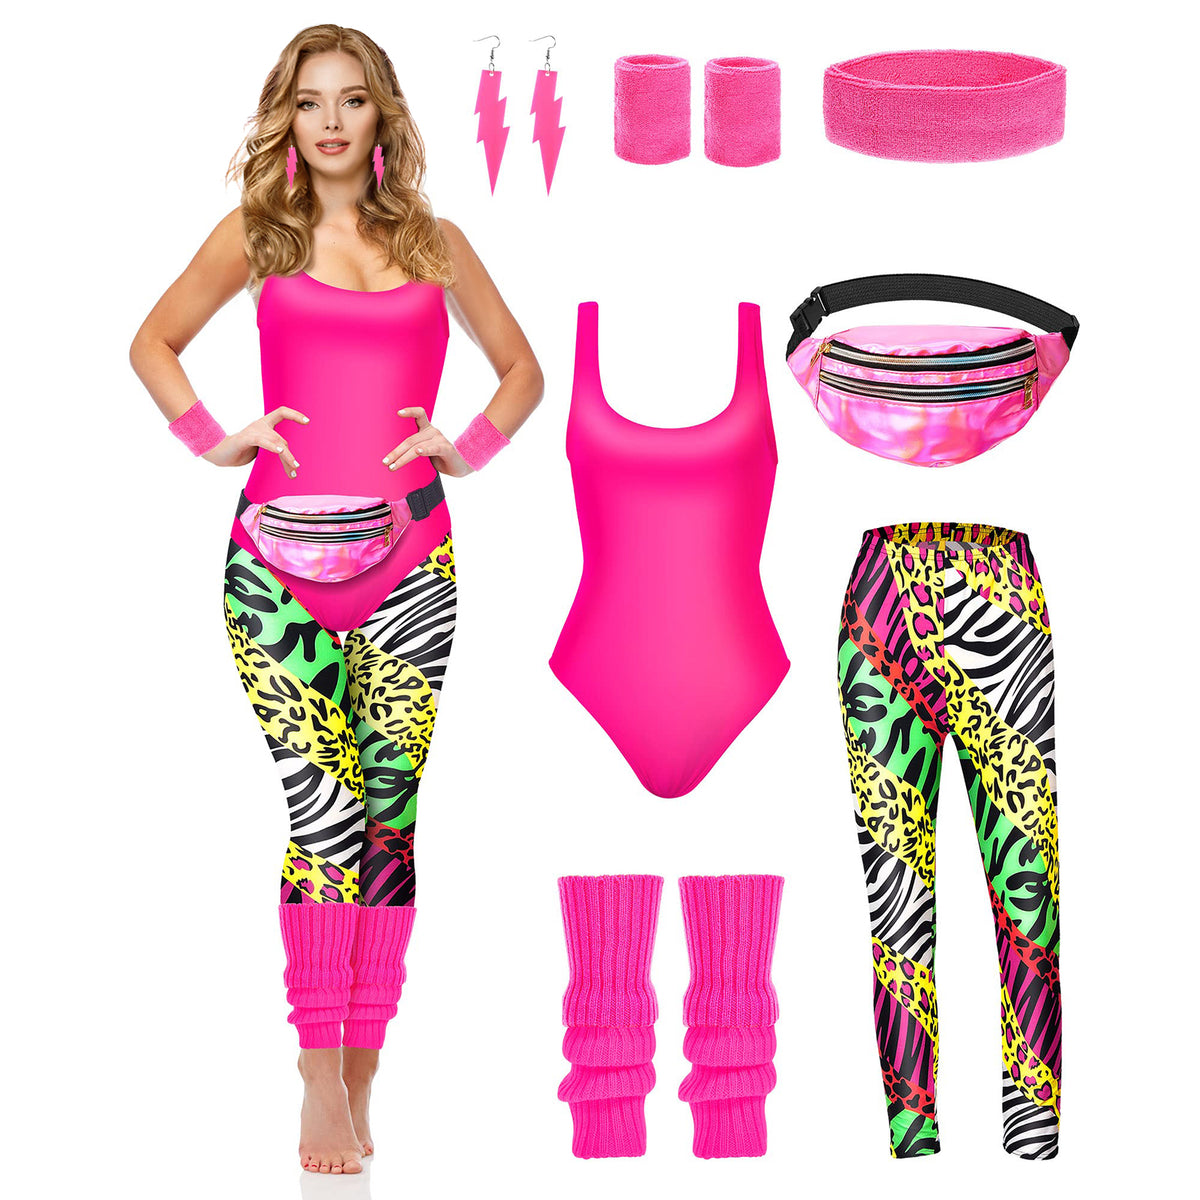 80's Workout Costumes & Outfits